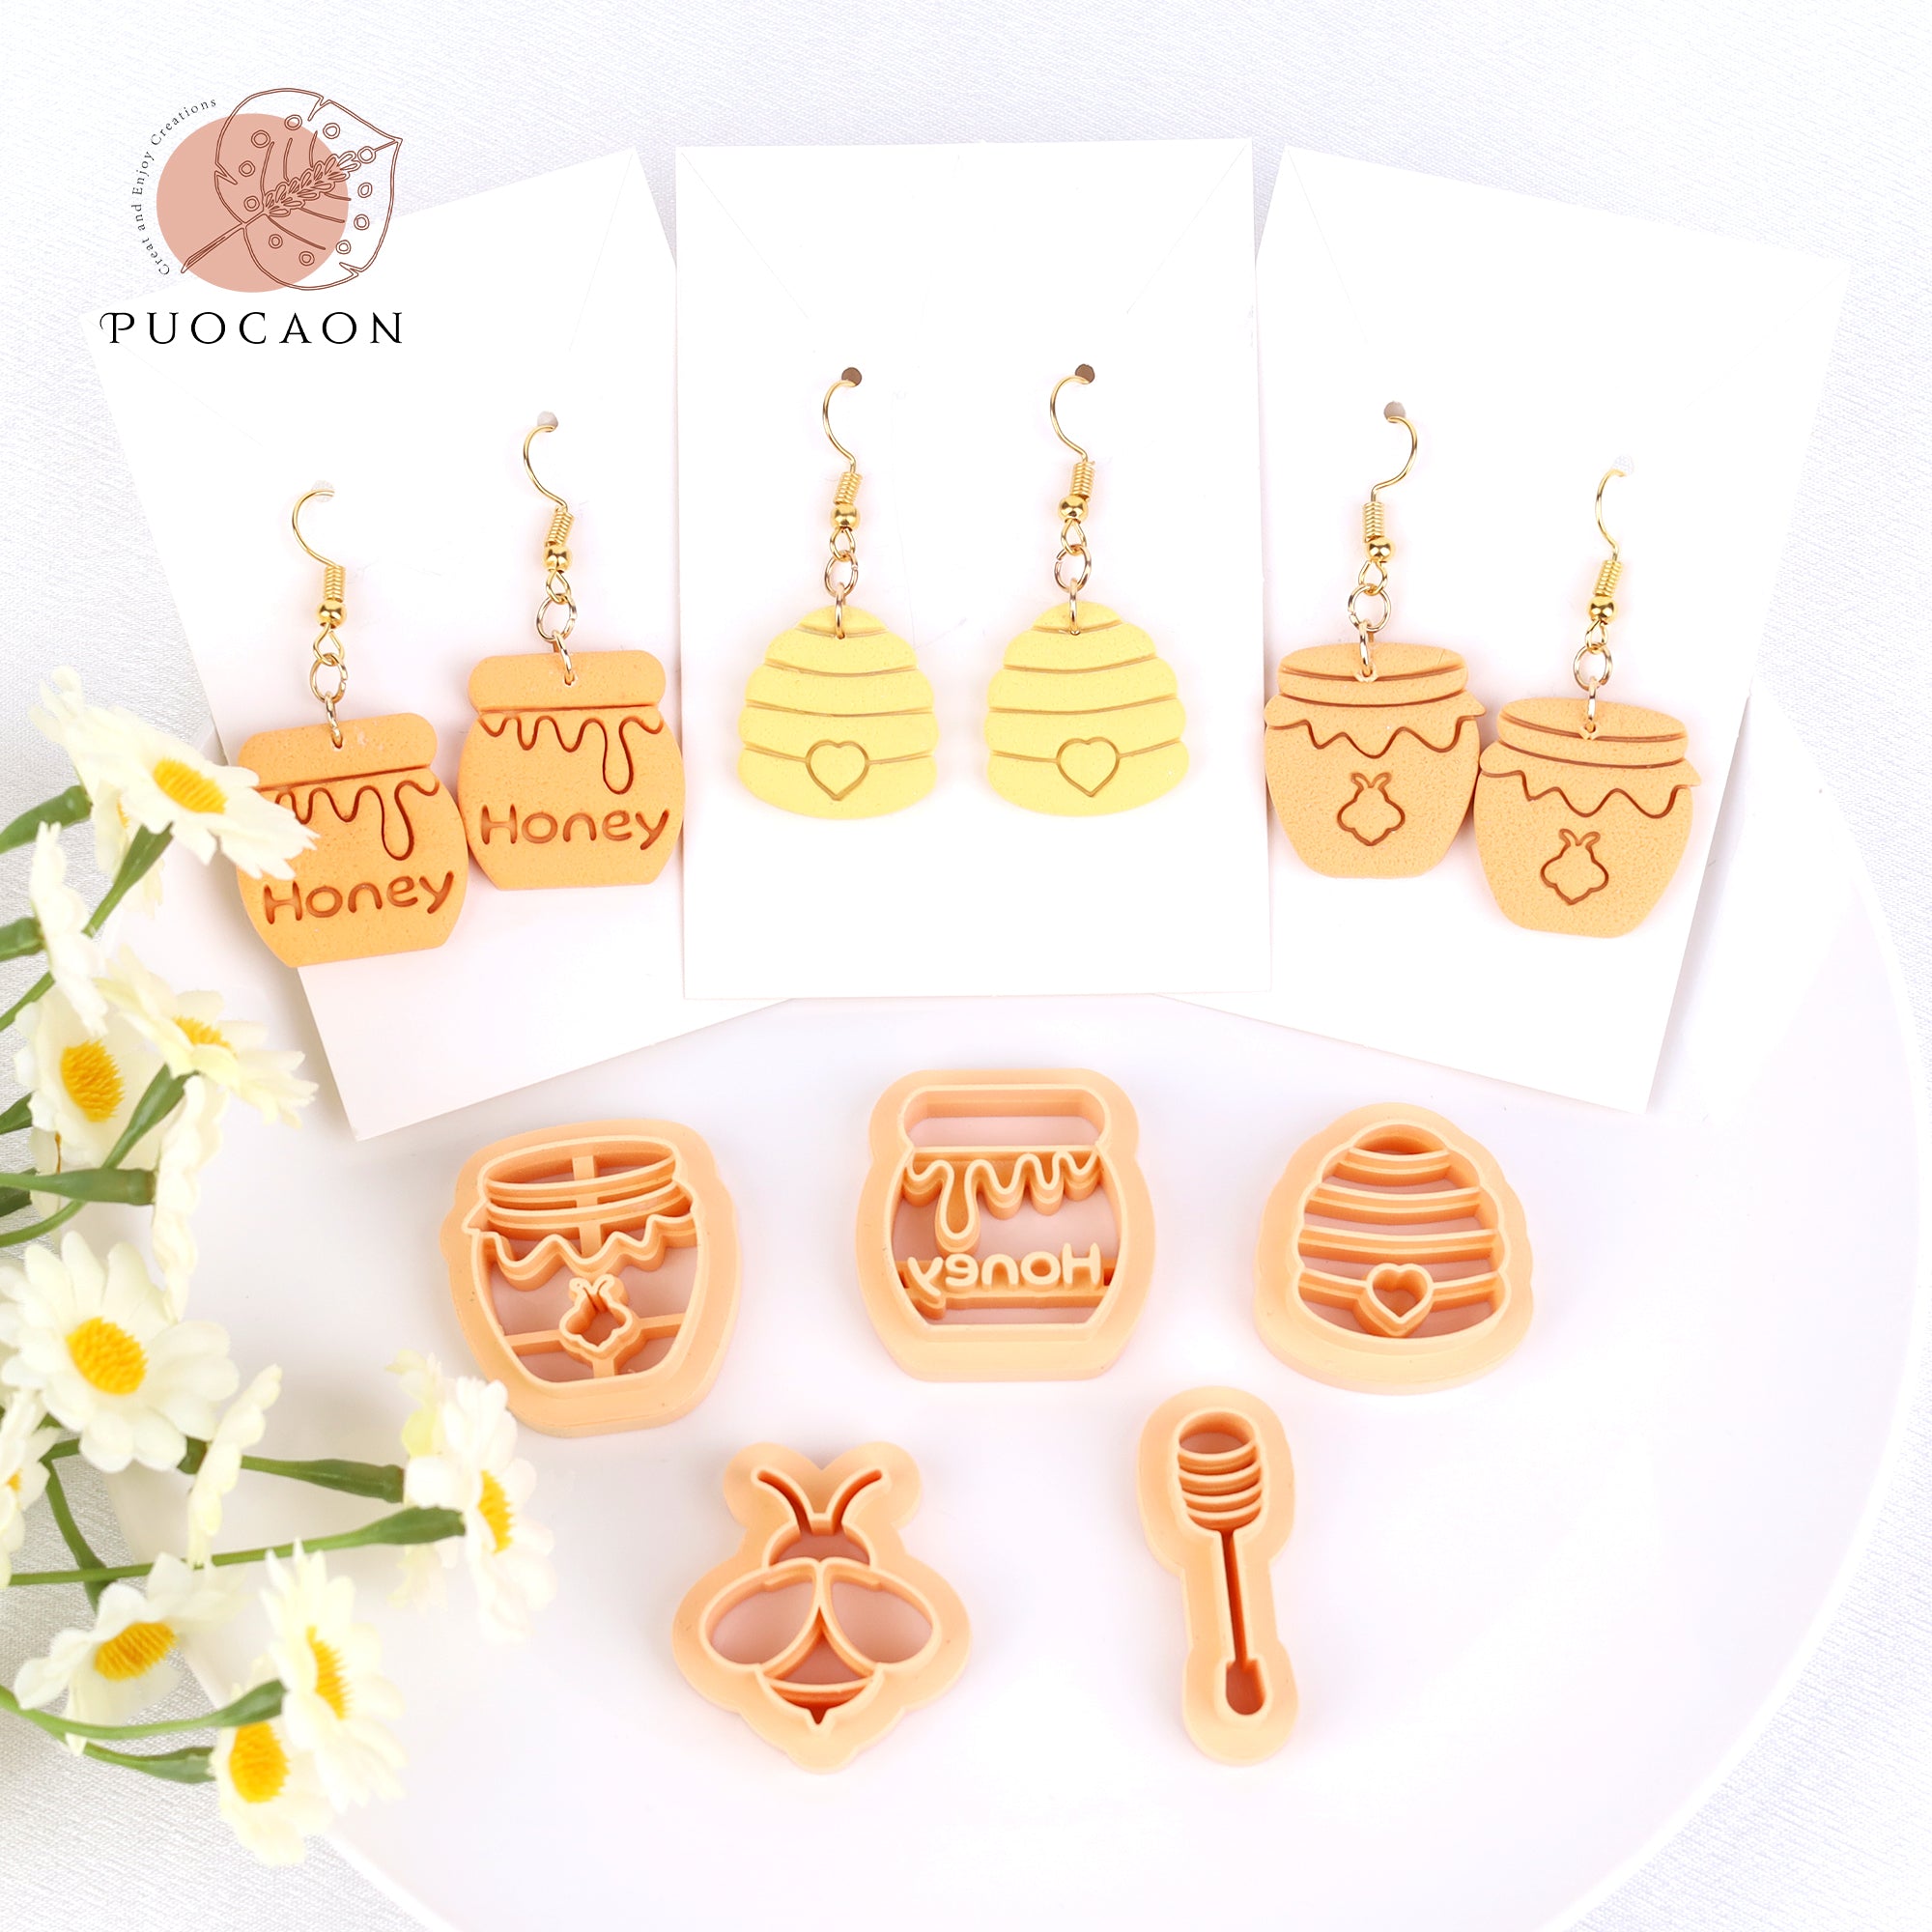 Puocaon Honey Bee Clay Cutters - 5 Pcs